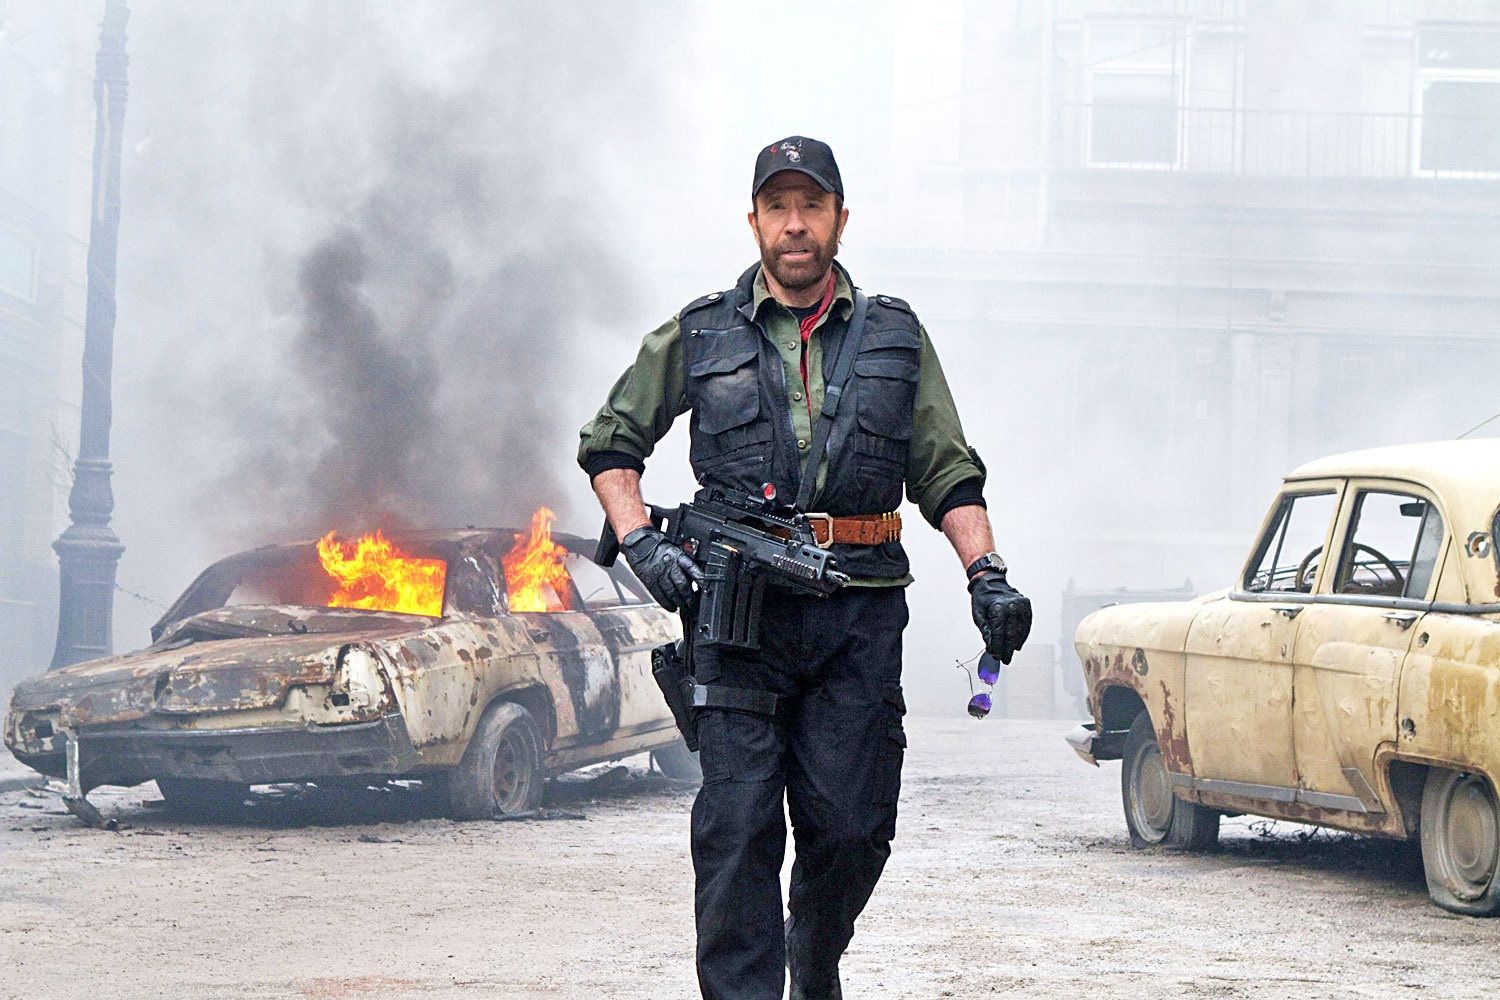 Chuck Norris in The Expendables.